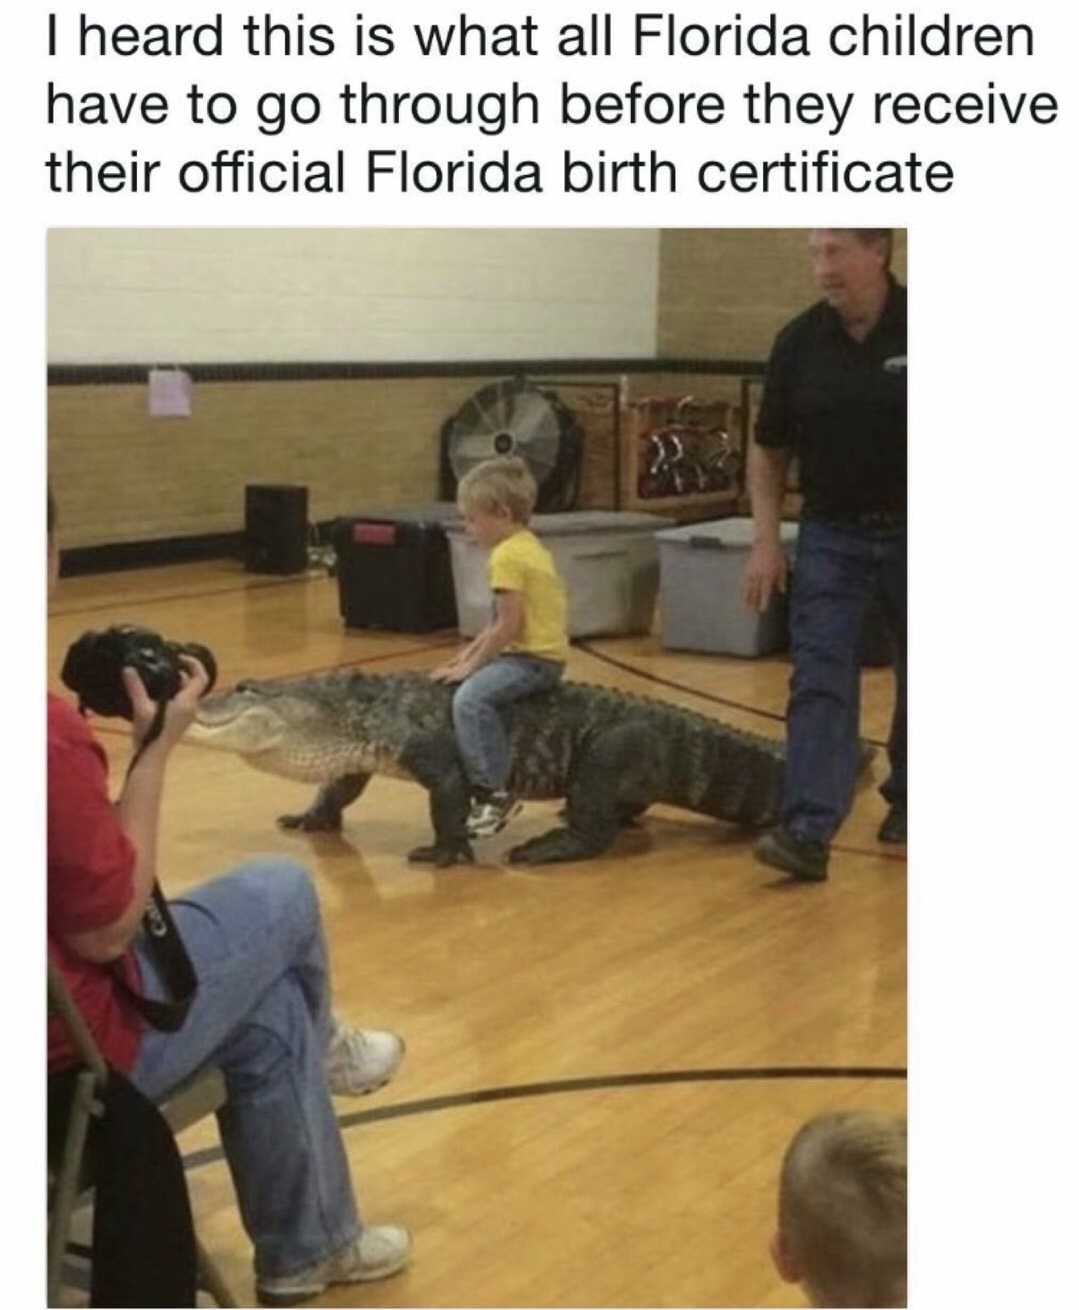 memes about living in florida - I heard this is what all Florida children have to go through before they receive their official Florida birth certificate